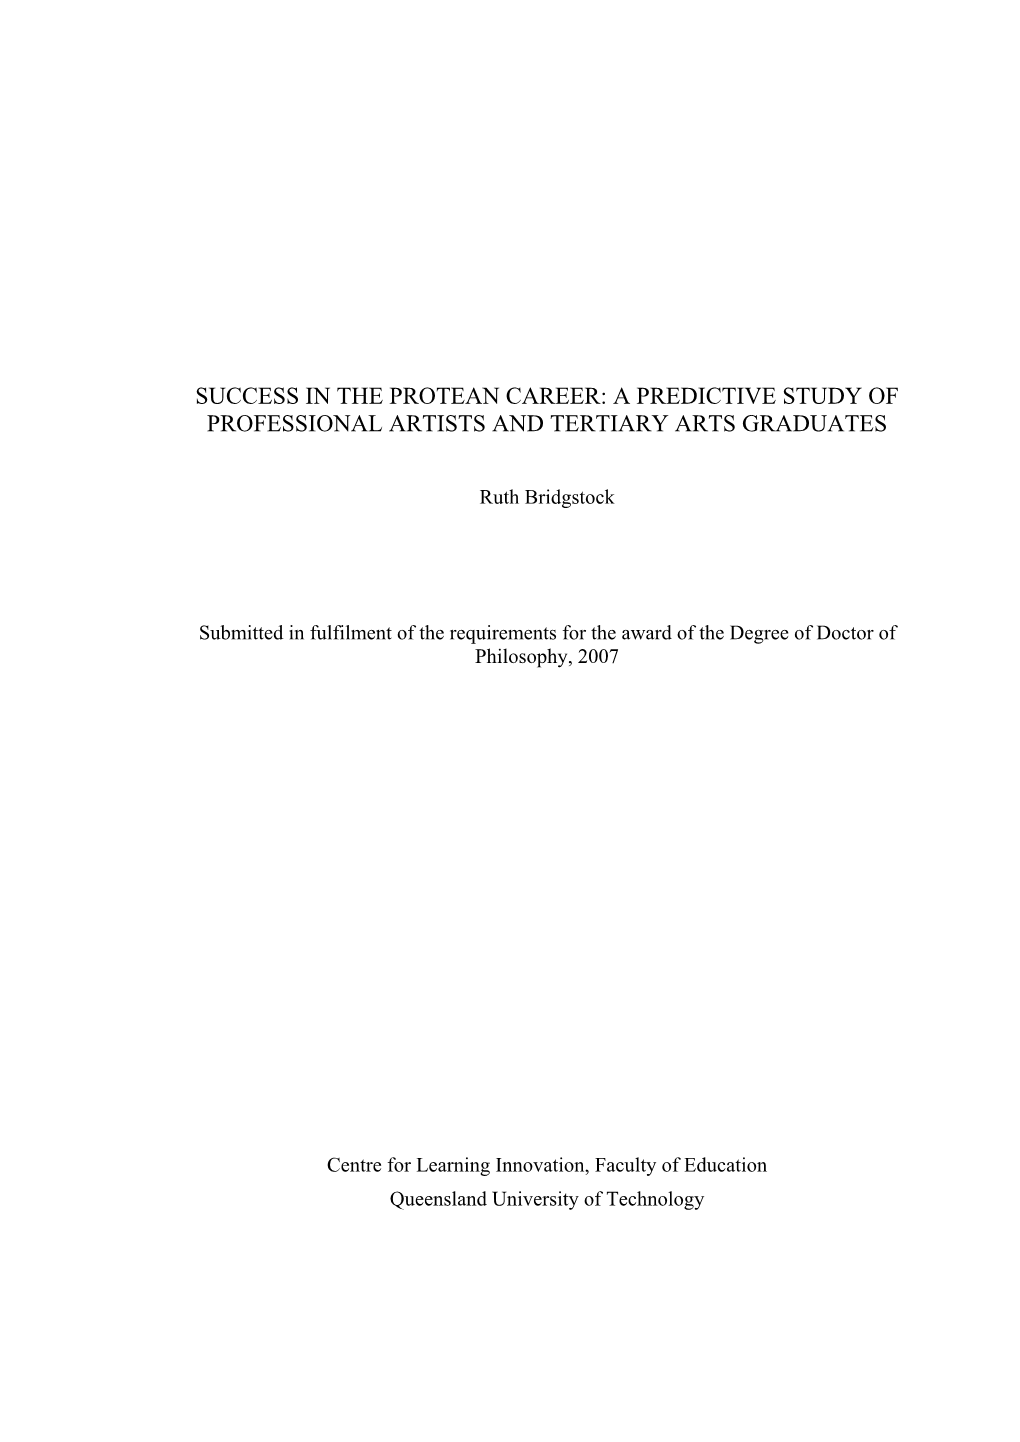 Success in the Protean Career: a Predictive Study of Professional Artists and Tertiary Arts Graduates